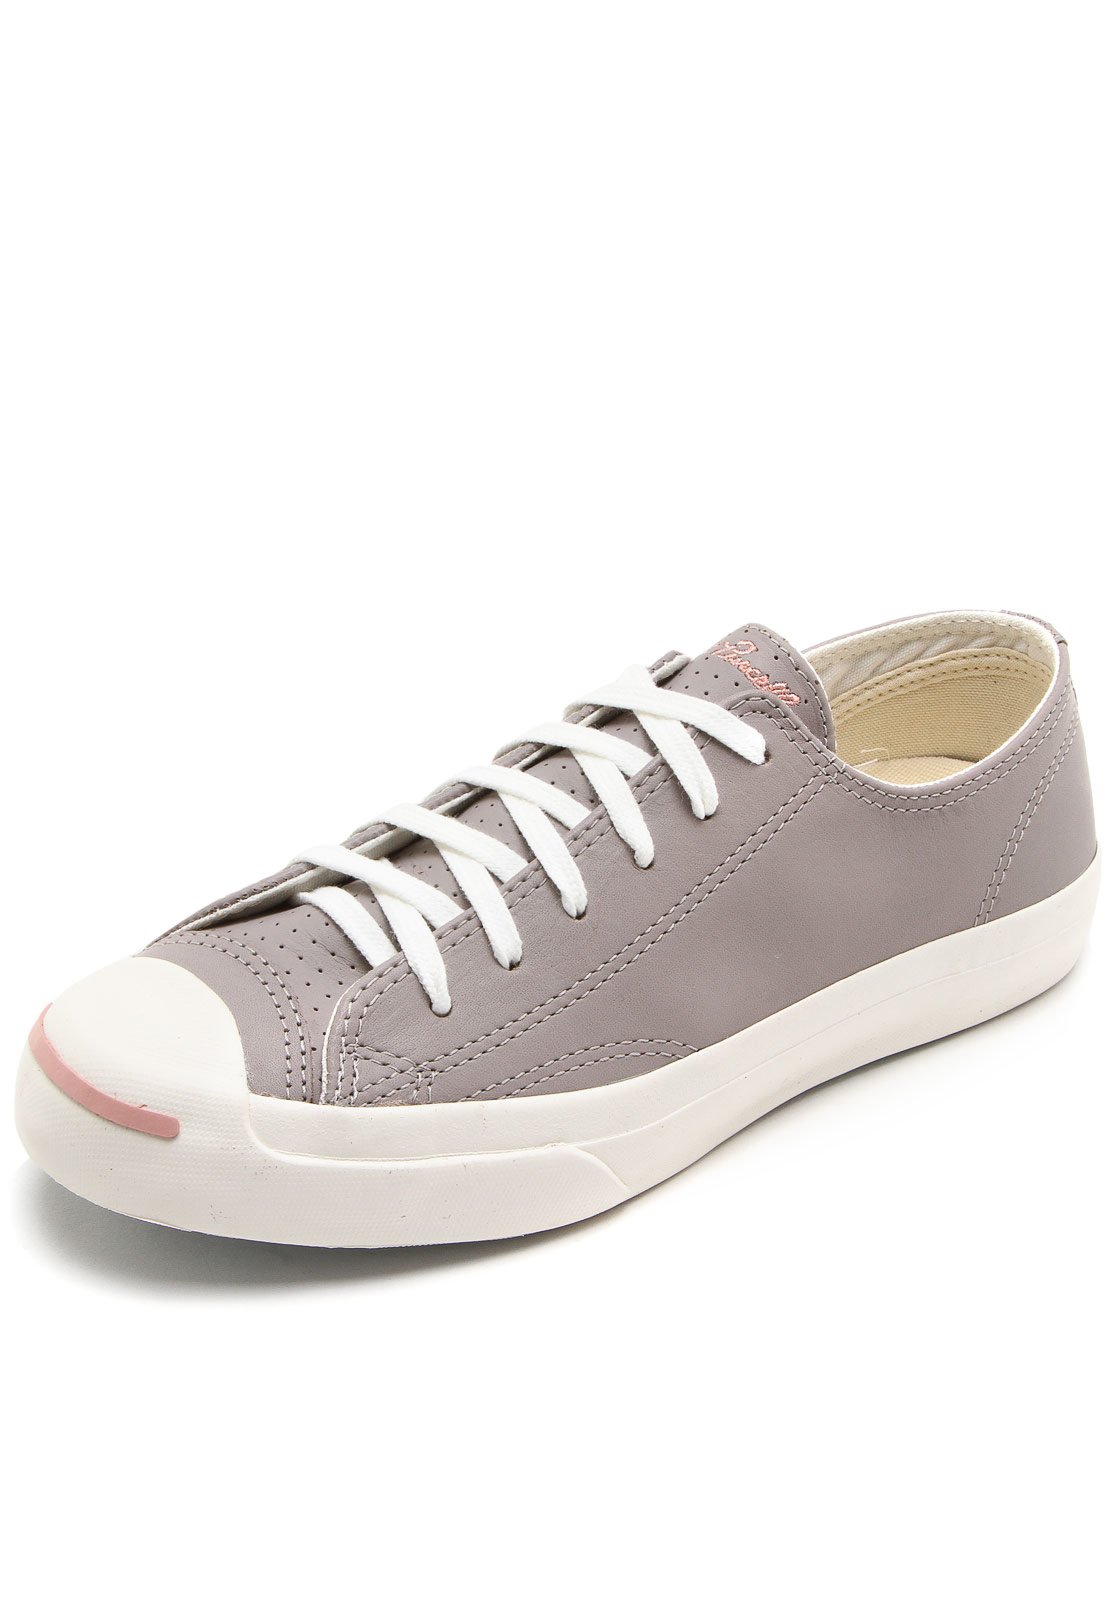 converse jack purcell couro